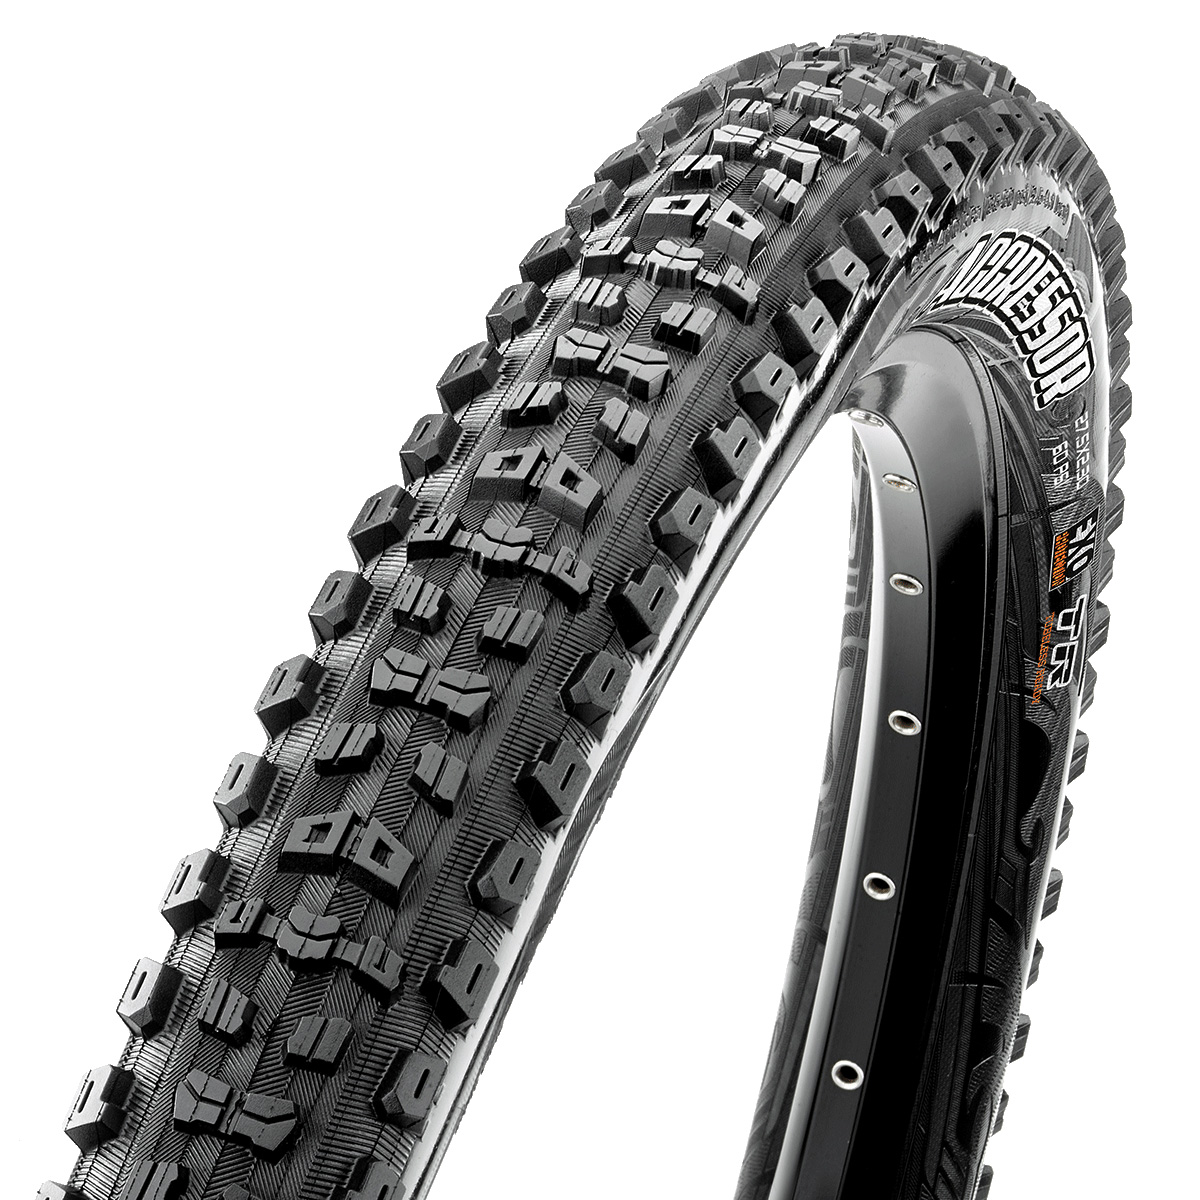 Maxxis Aggressor 29x2.50 EXO Protection, Tubeless Ready